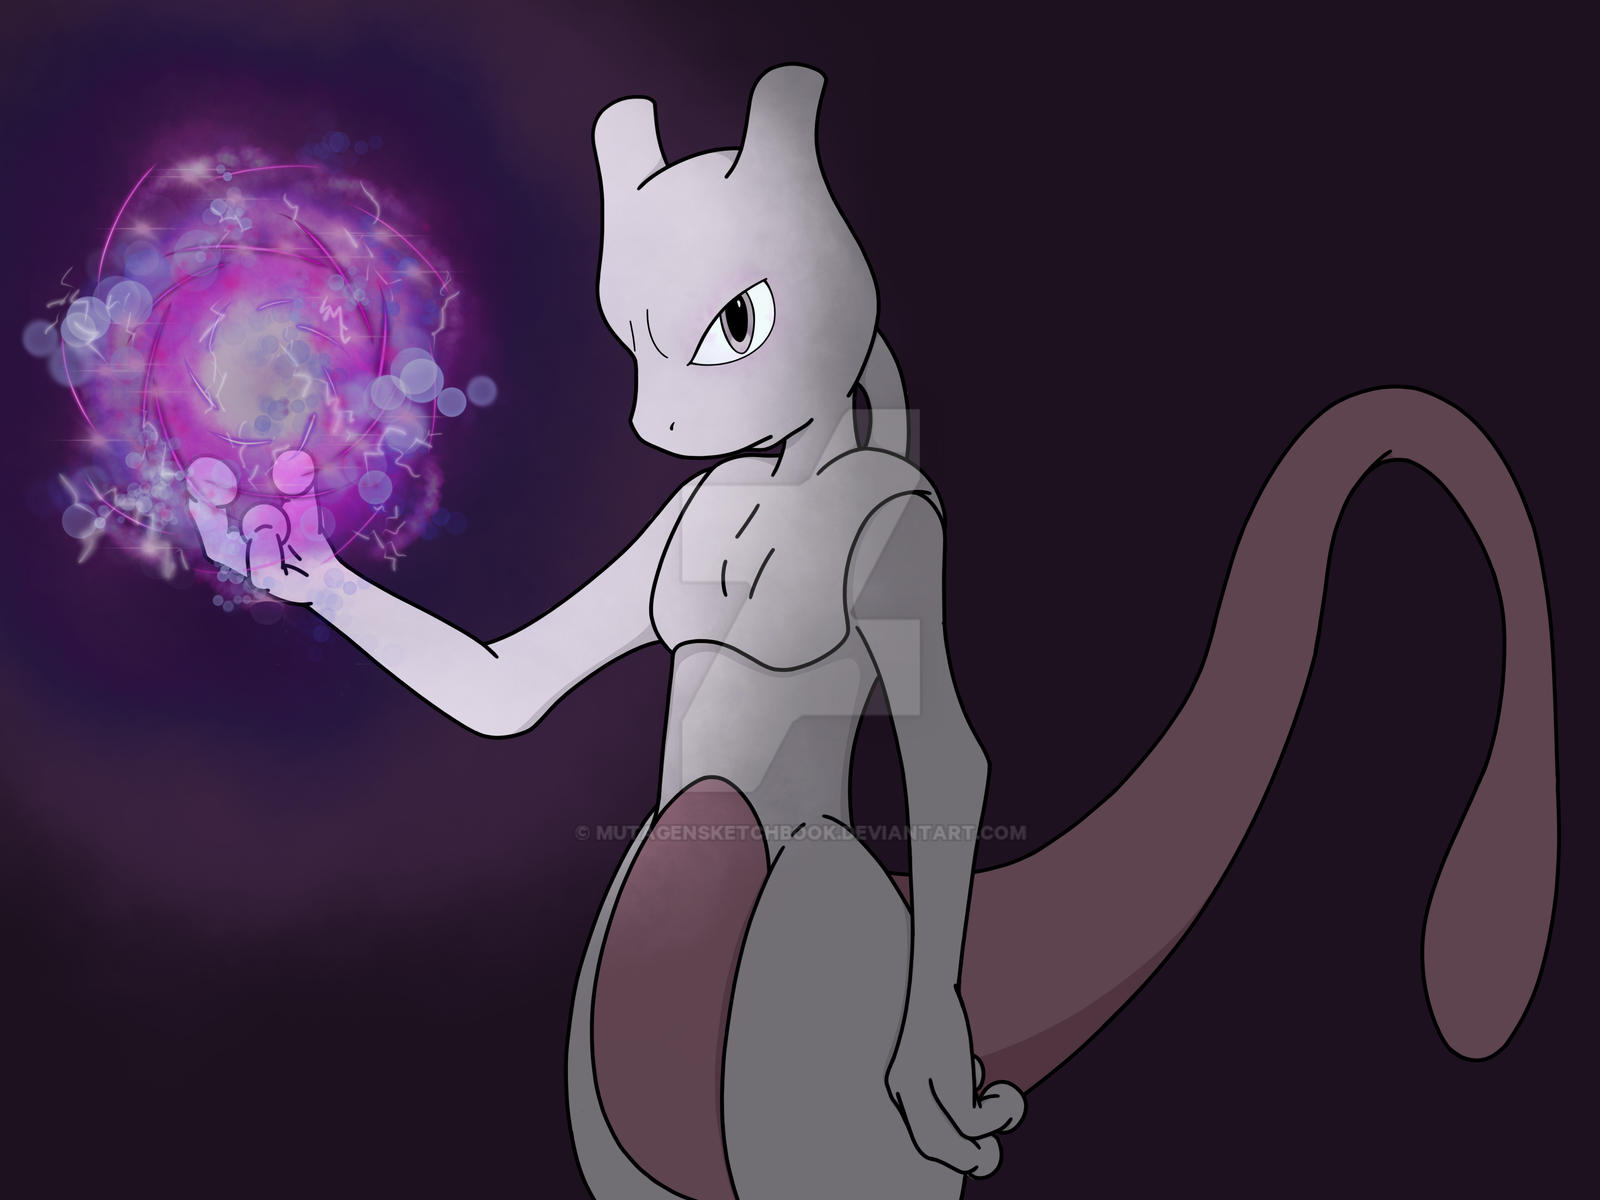 How Good is the New Psystrike Mewtwo?